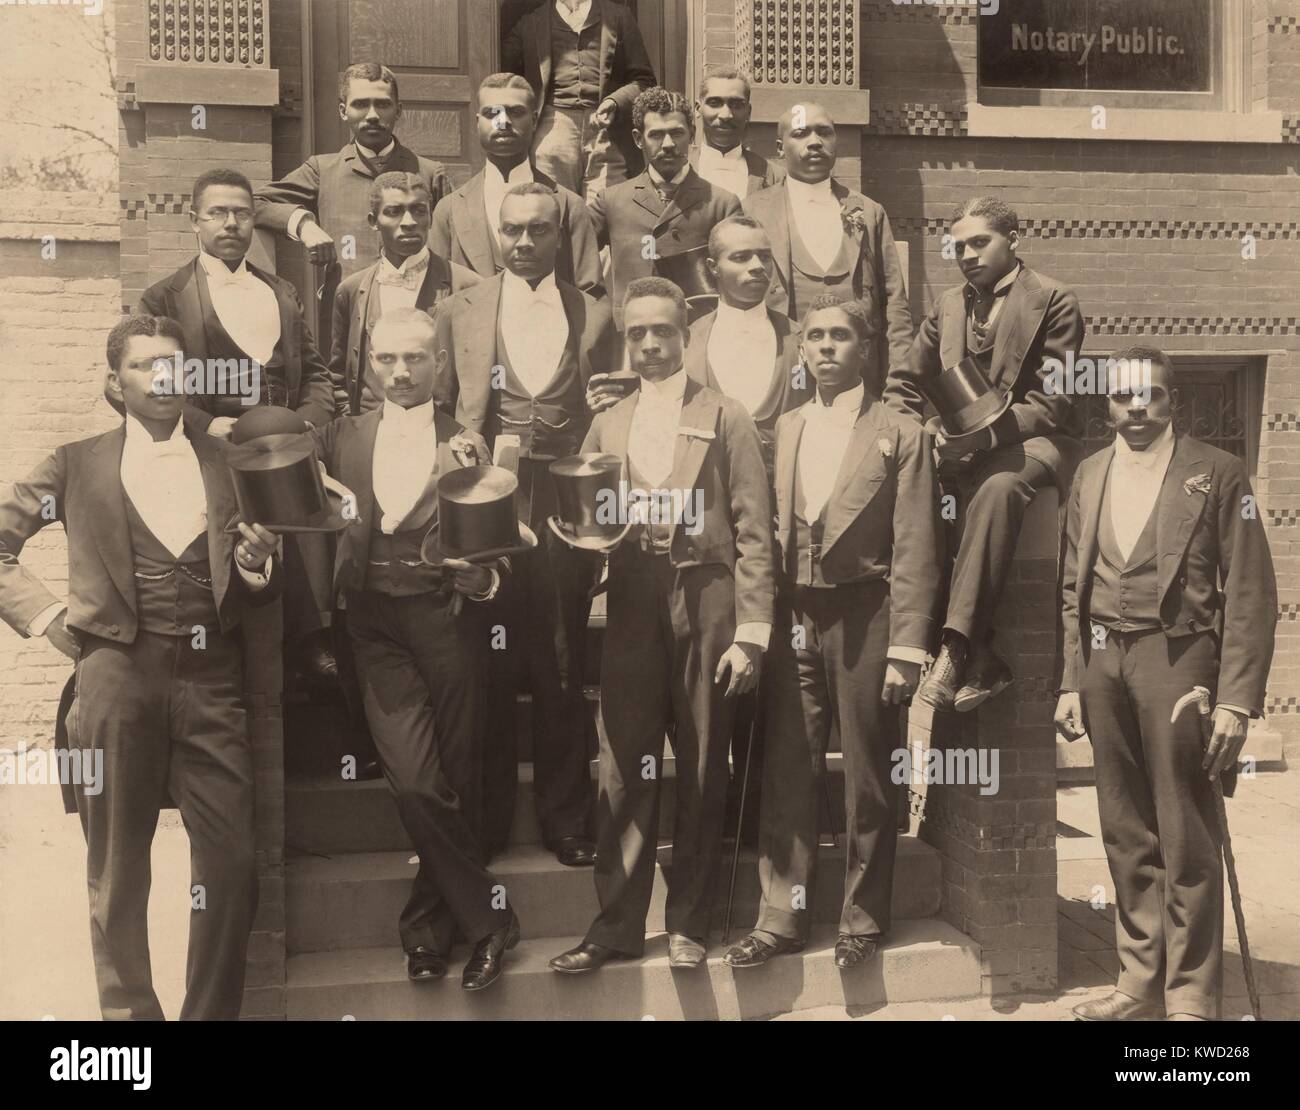 Howard University graduating law class poses in formal dress in 1900. Lawyers from Howard were the built the legal foundation of the 20th century Civil Rights Movement  (BSLOC 2017 20 171) Stock Photo